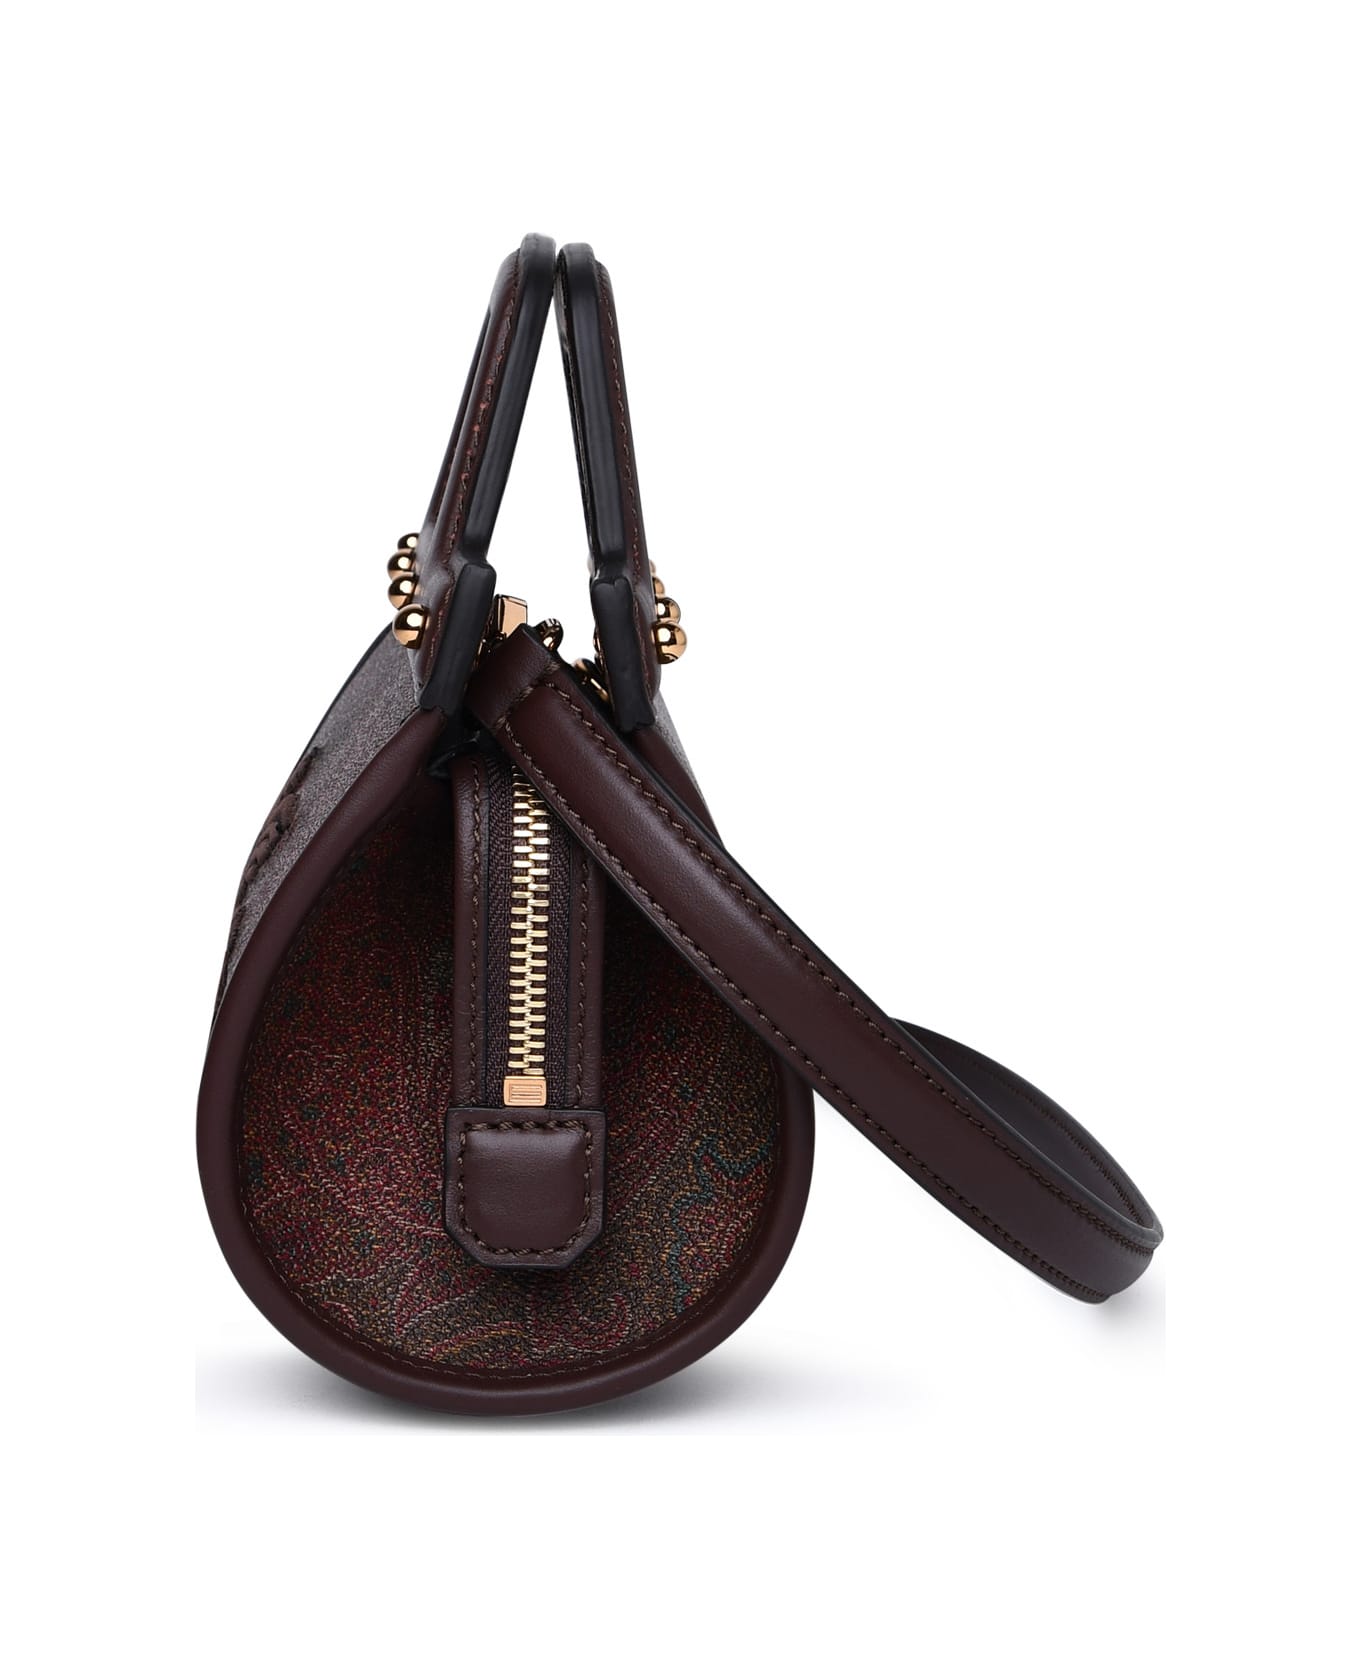 Etro Brown Leather Blend Bag - Marrone